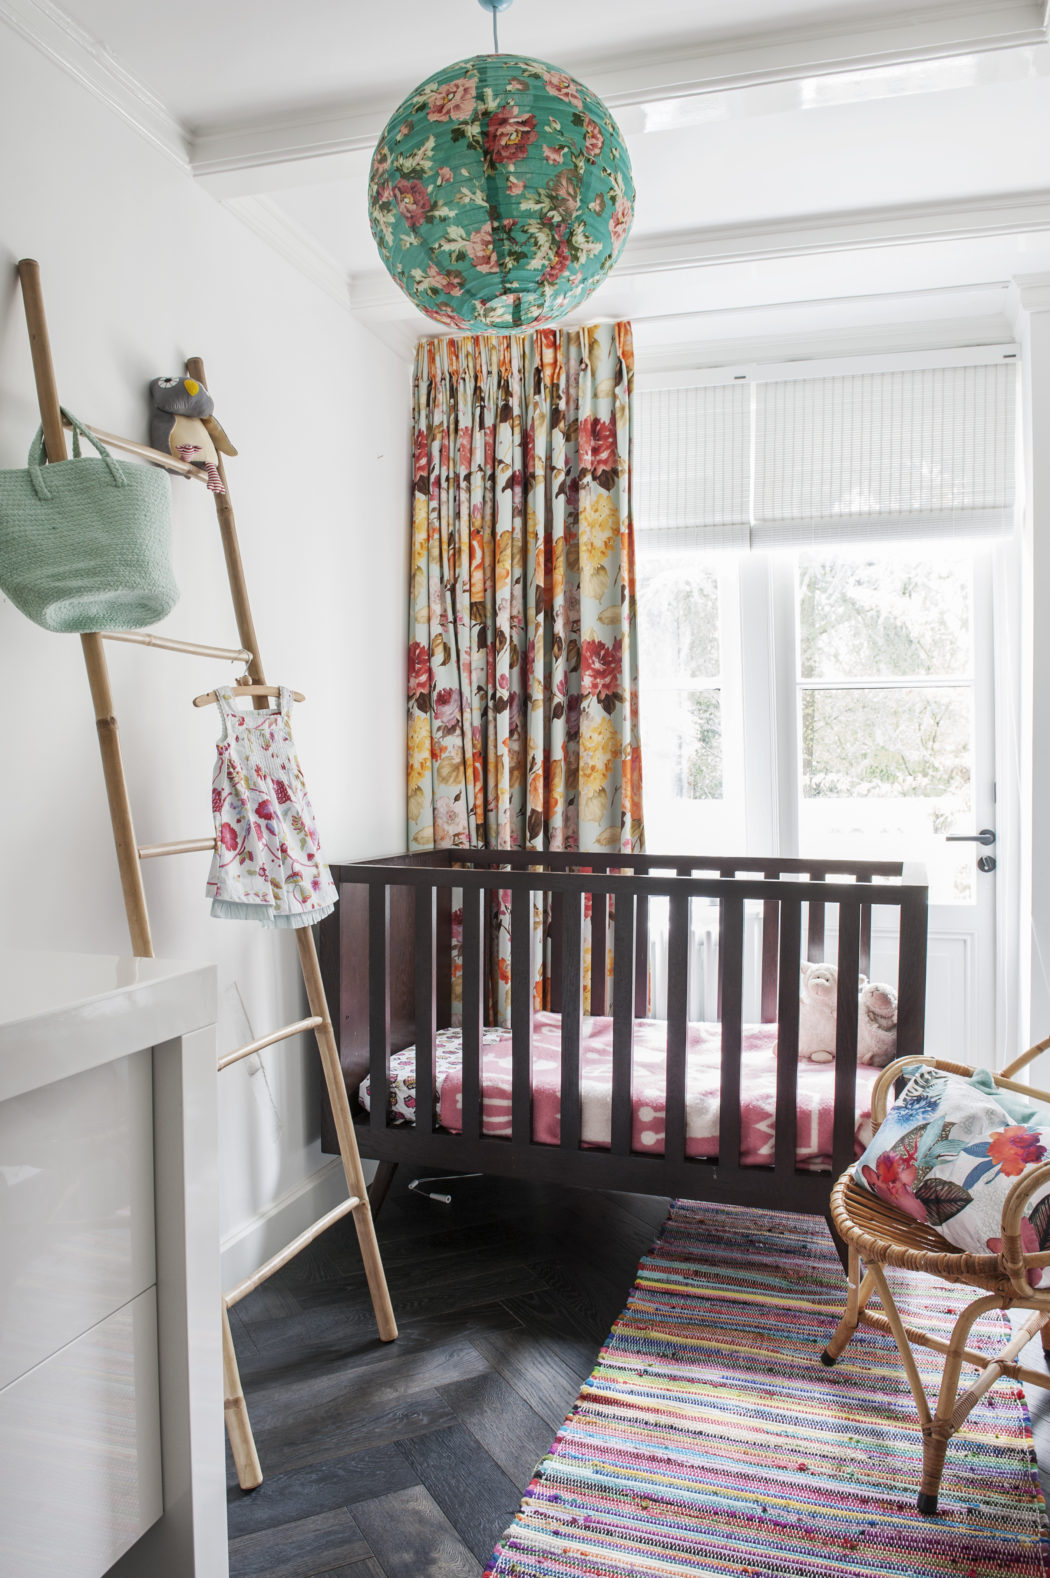 The kid's space is done with floral textiles, a striped rug and looks very lively and colorful   exactly what a small girl needs